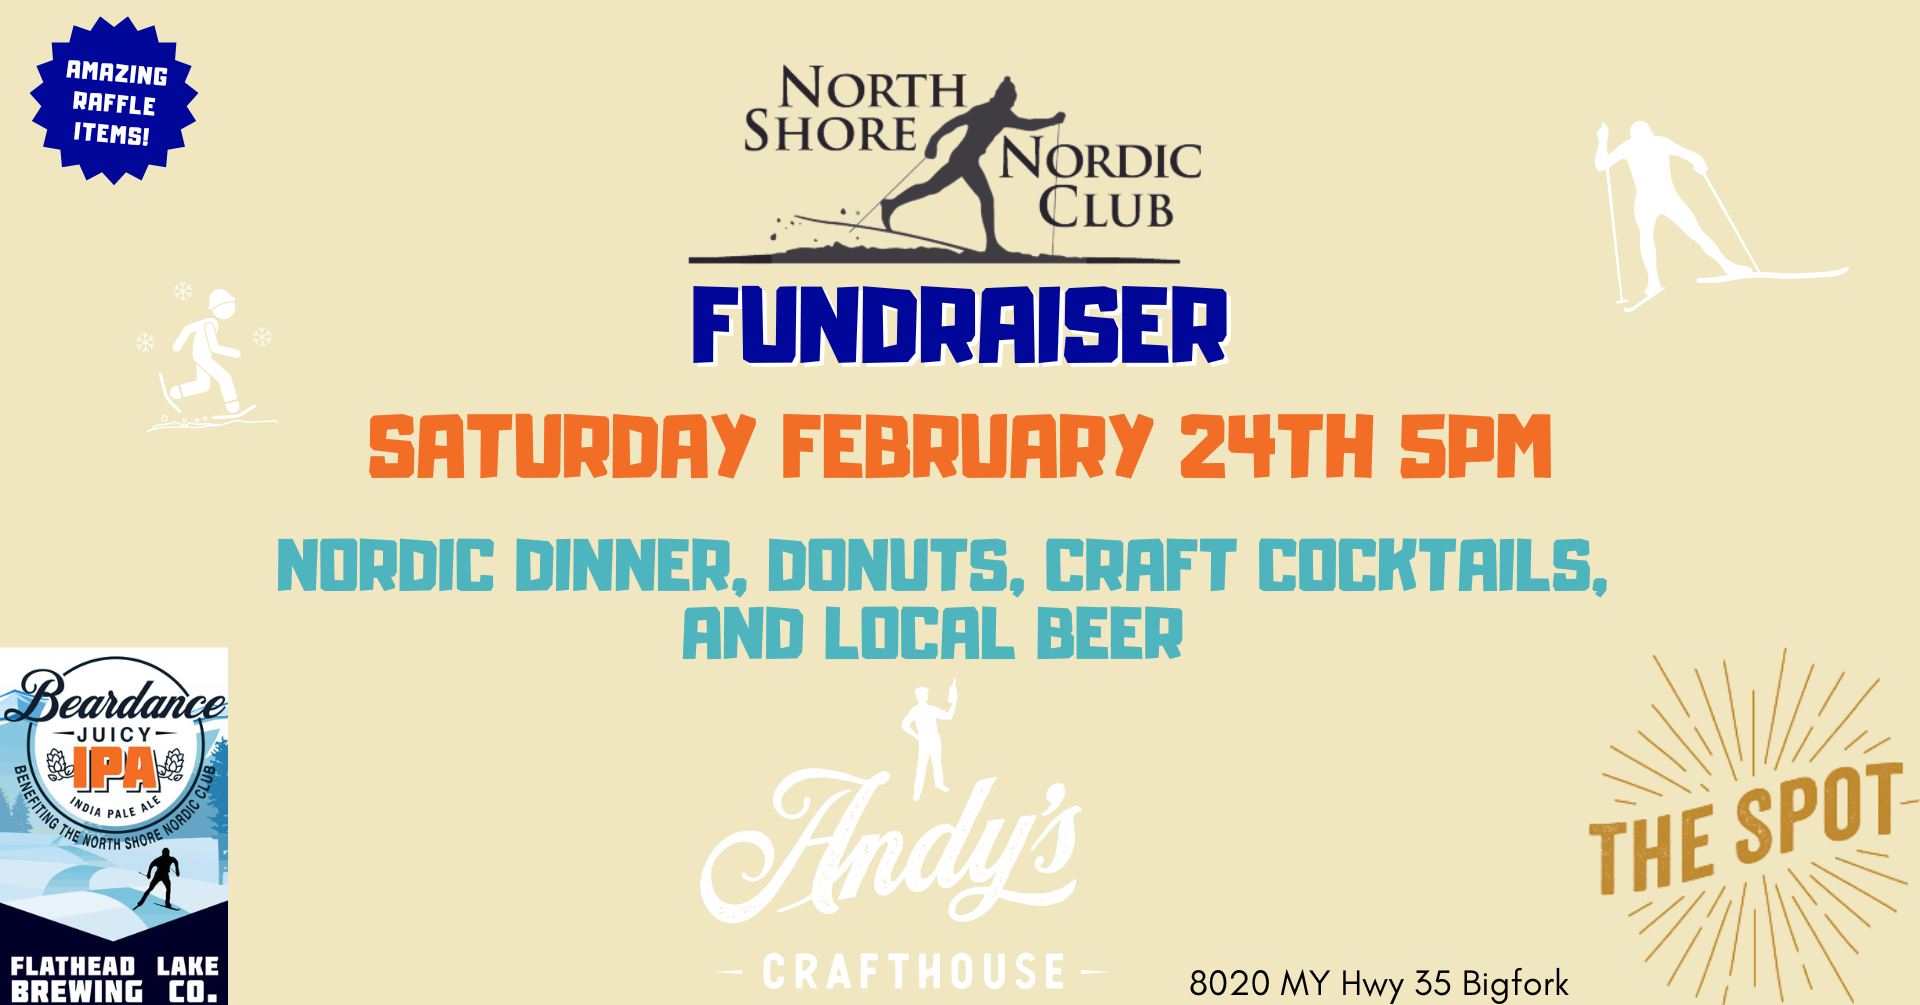 North Shore Nordic Fundraiser at Andy's Crafthouse